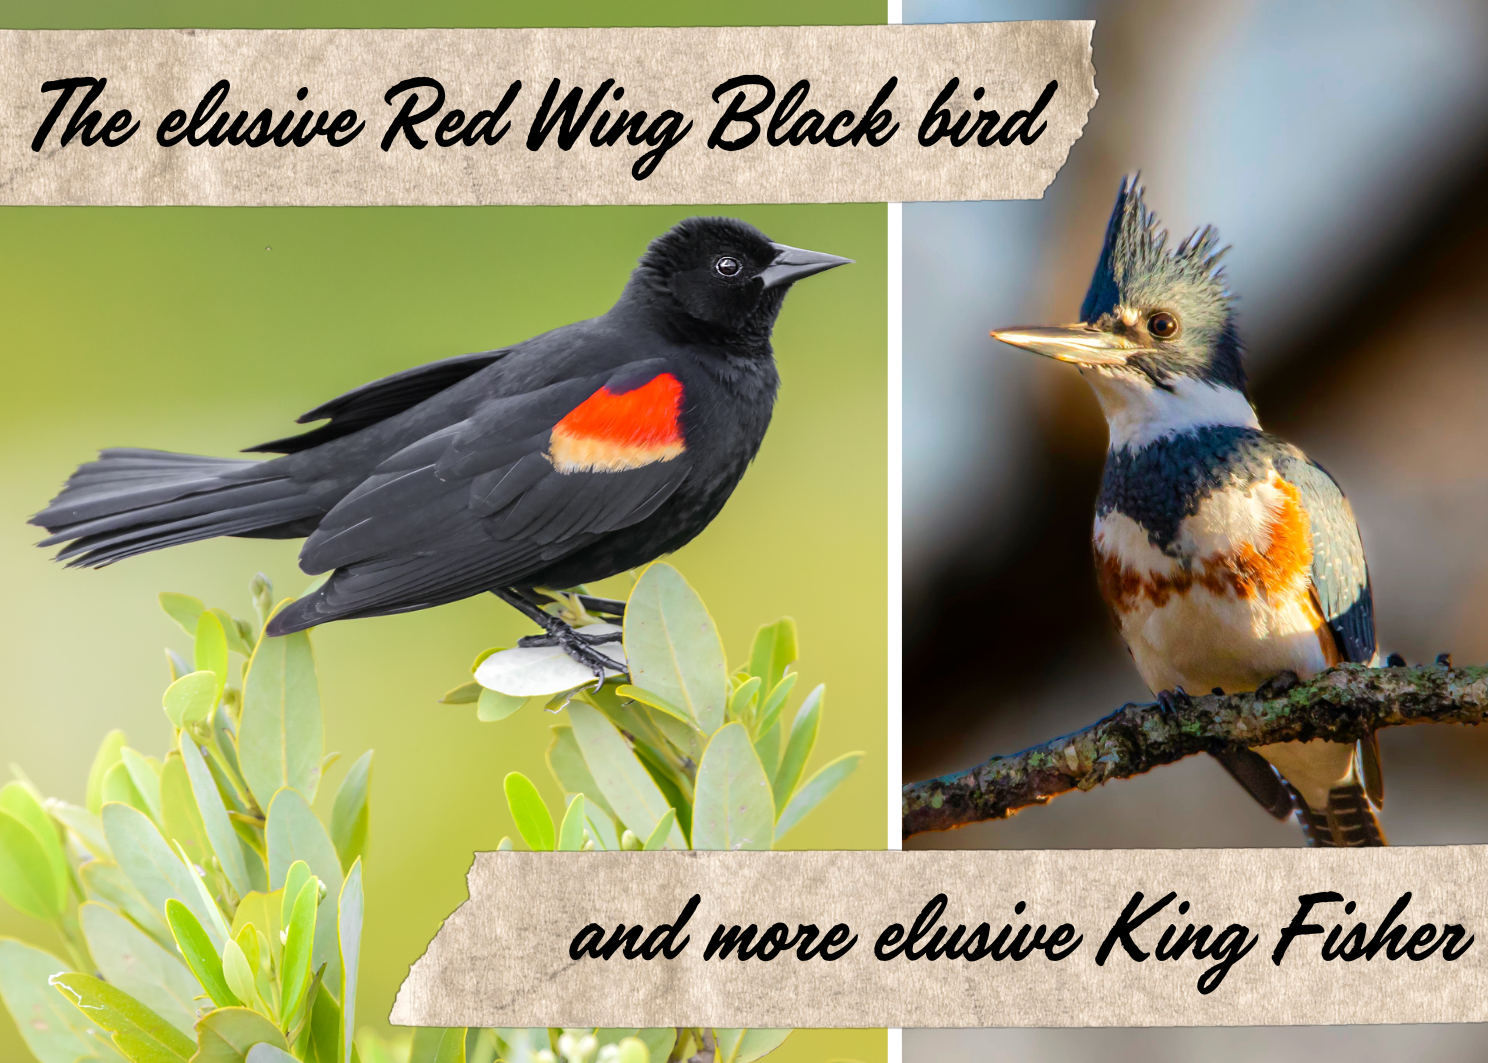 The elusive Red Wing Black bird and more elusive King Fisher 